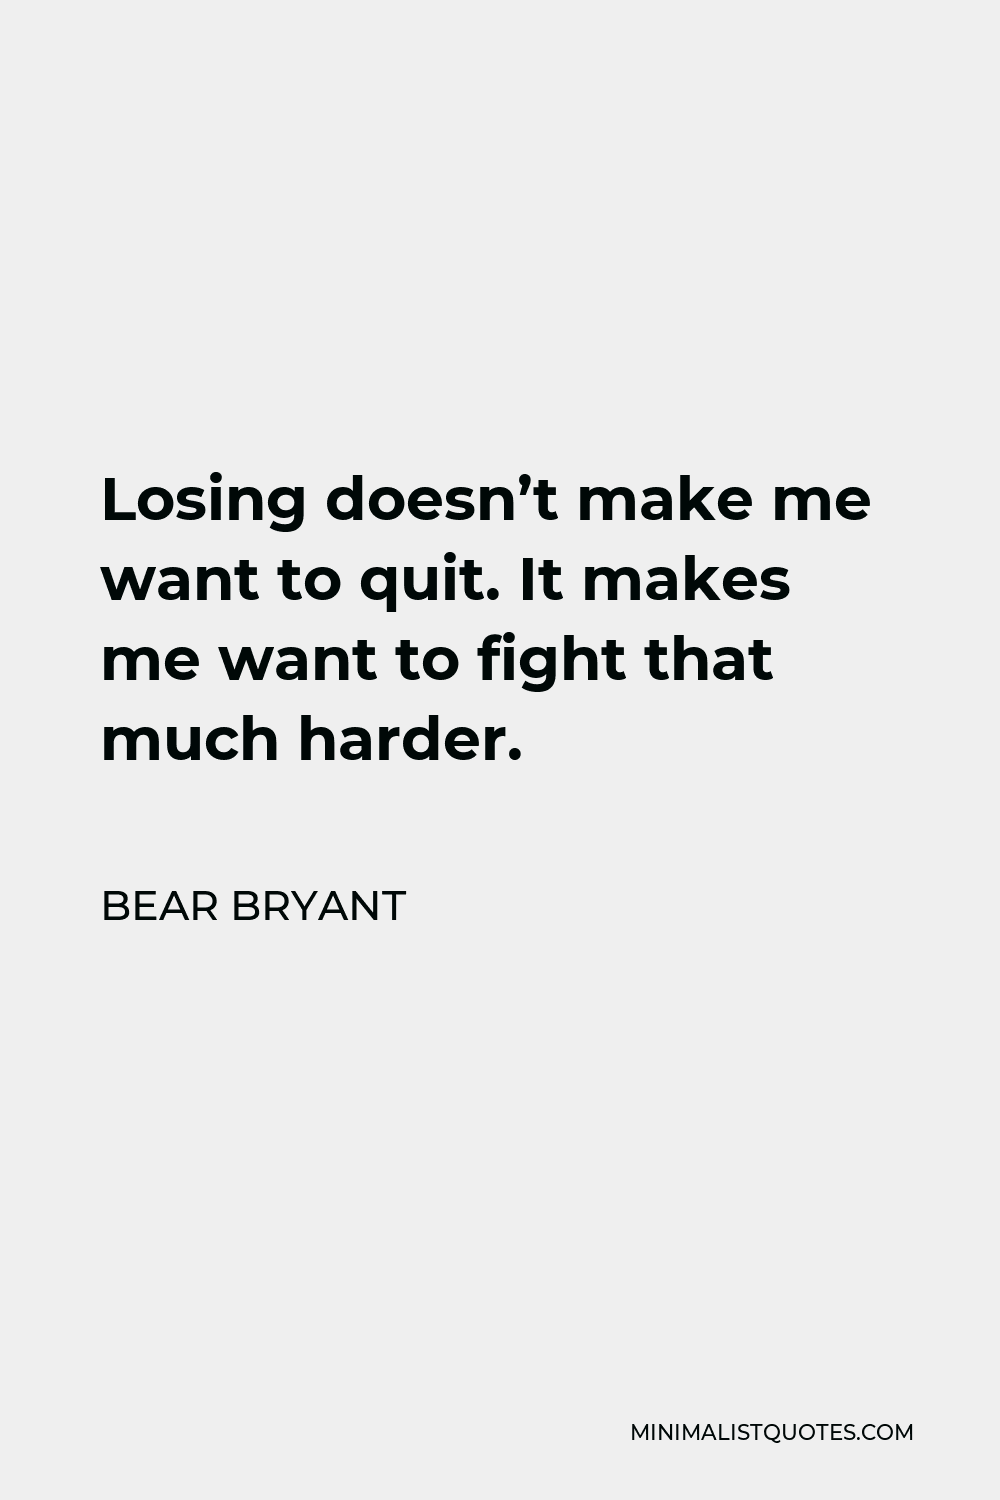 Bear Bryant Quote - Losing doesn’t make me want to quit. It makes me want to fight that much harder.